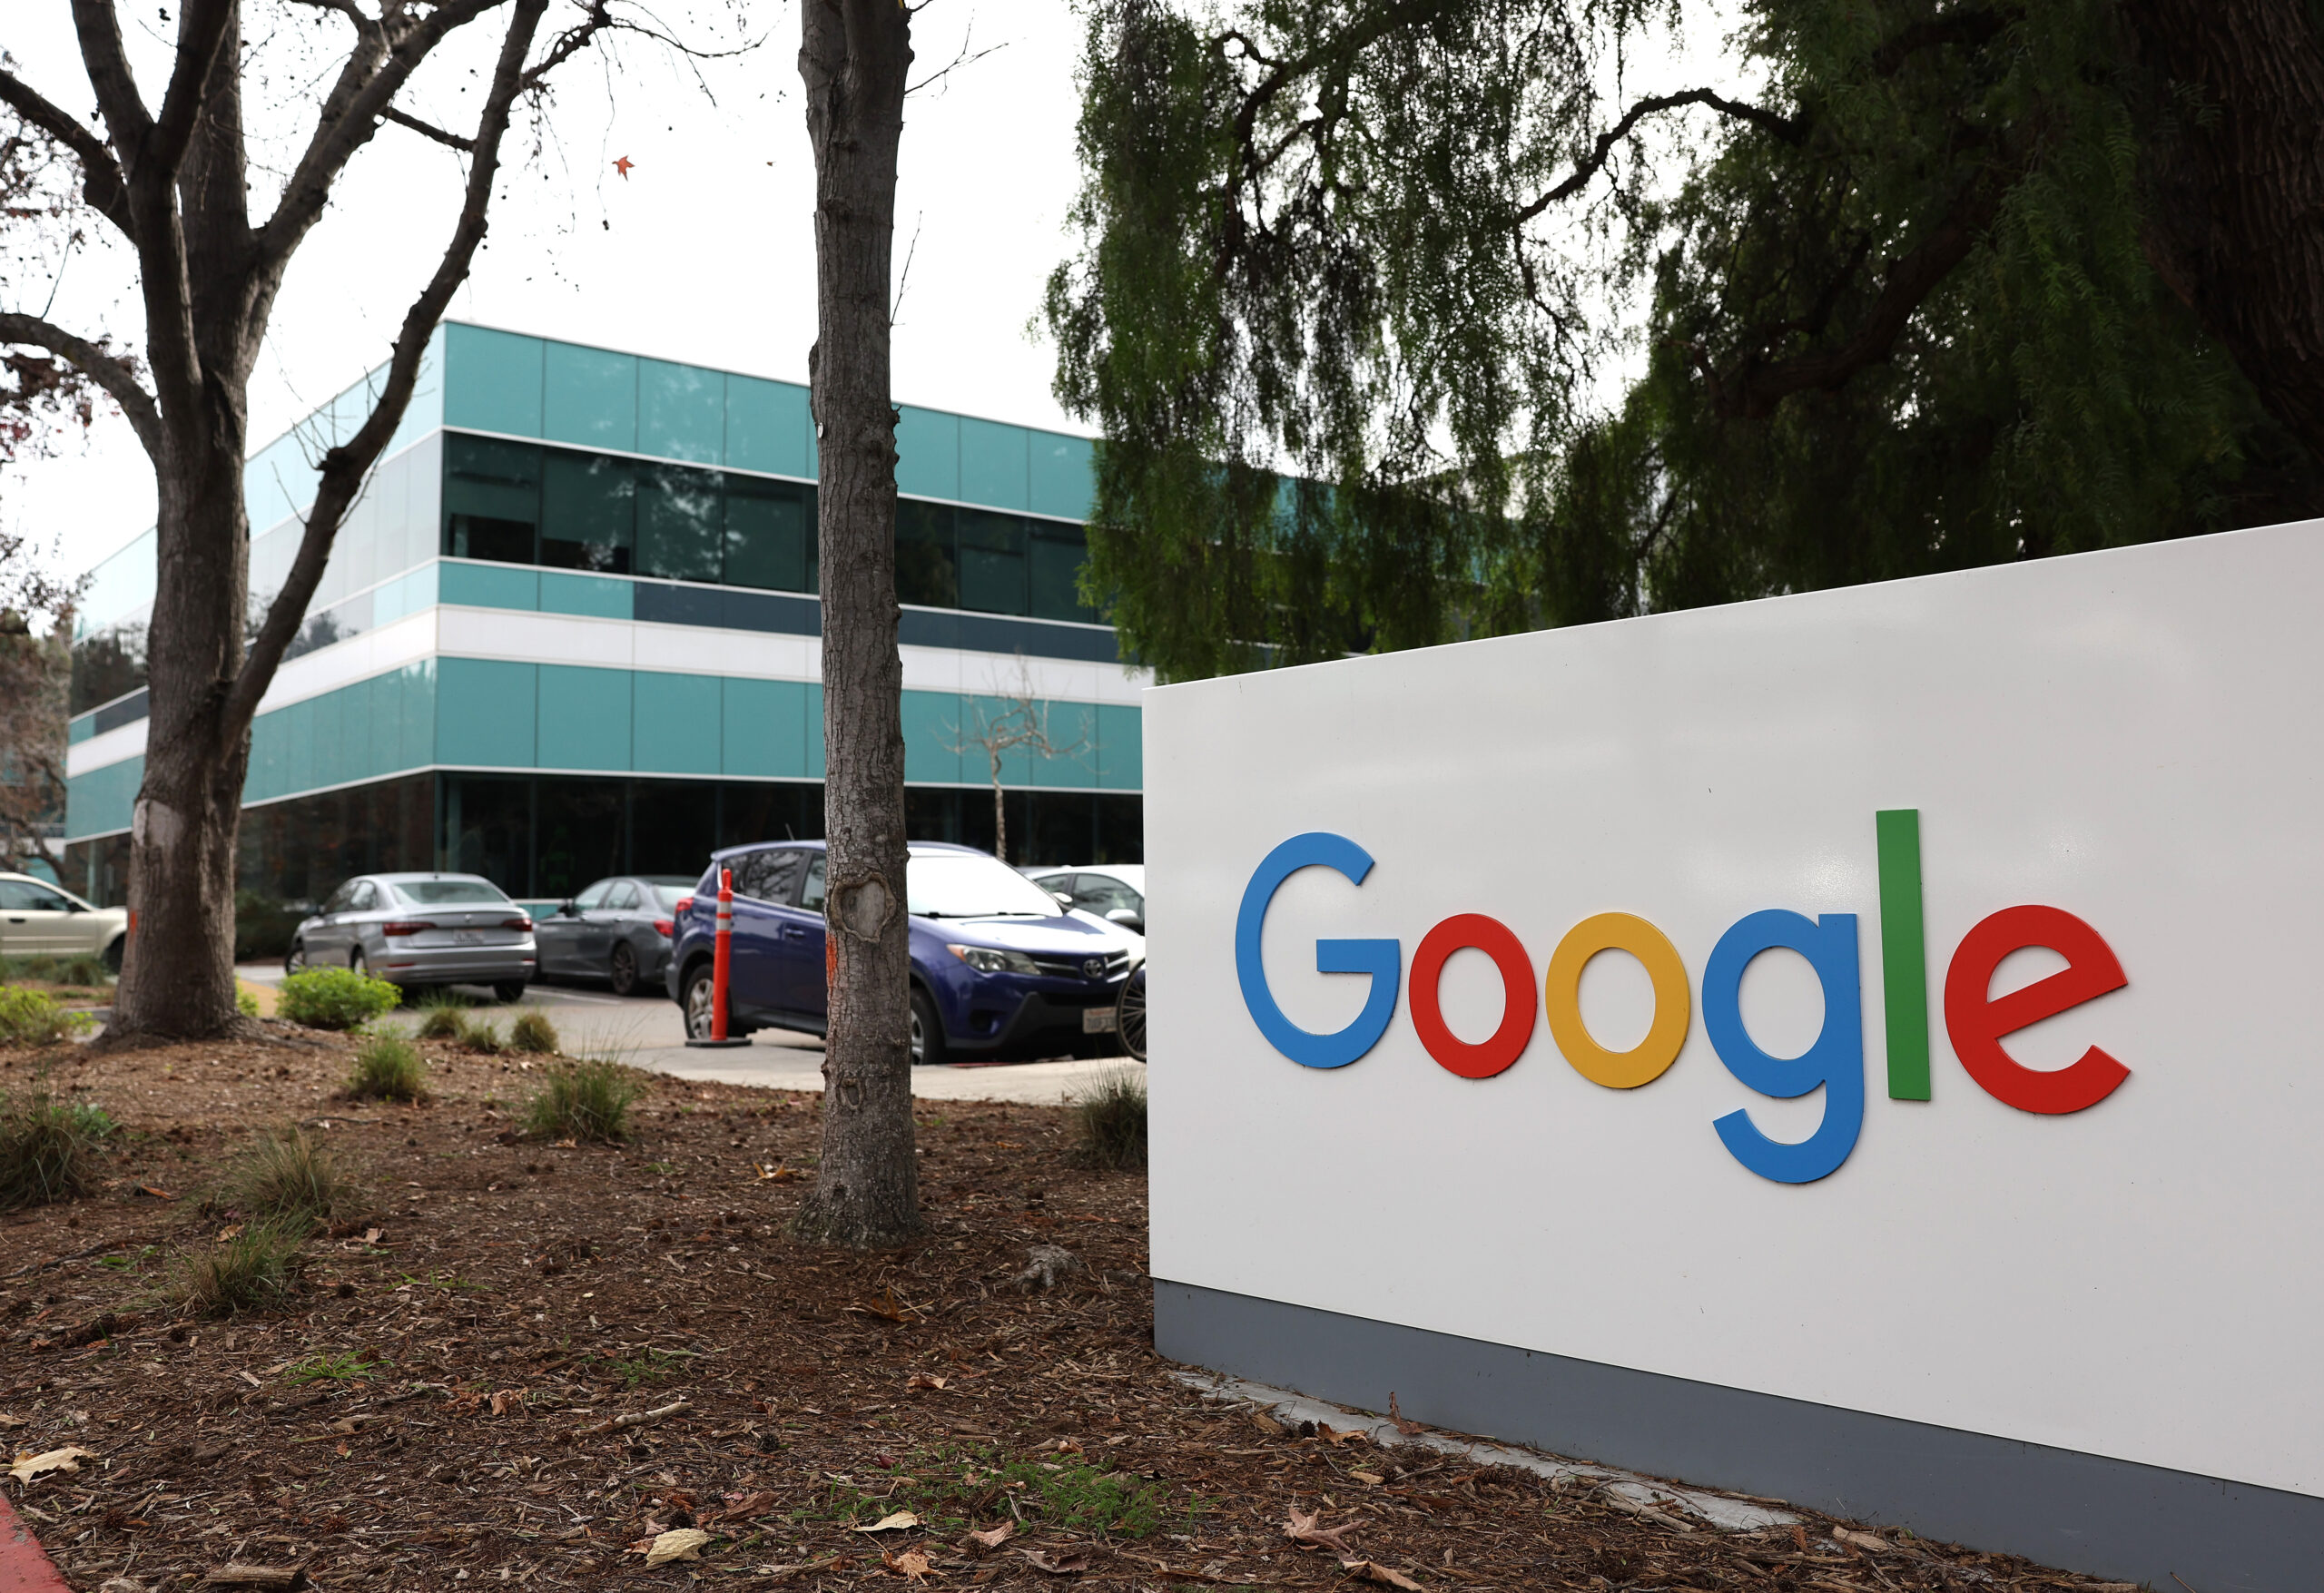 Google, Airtable Lay Off Hundreds of Workers This Week